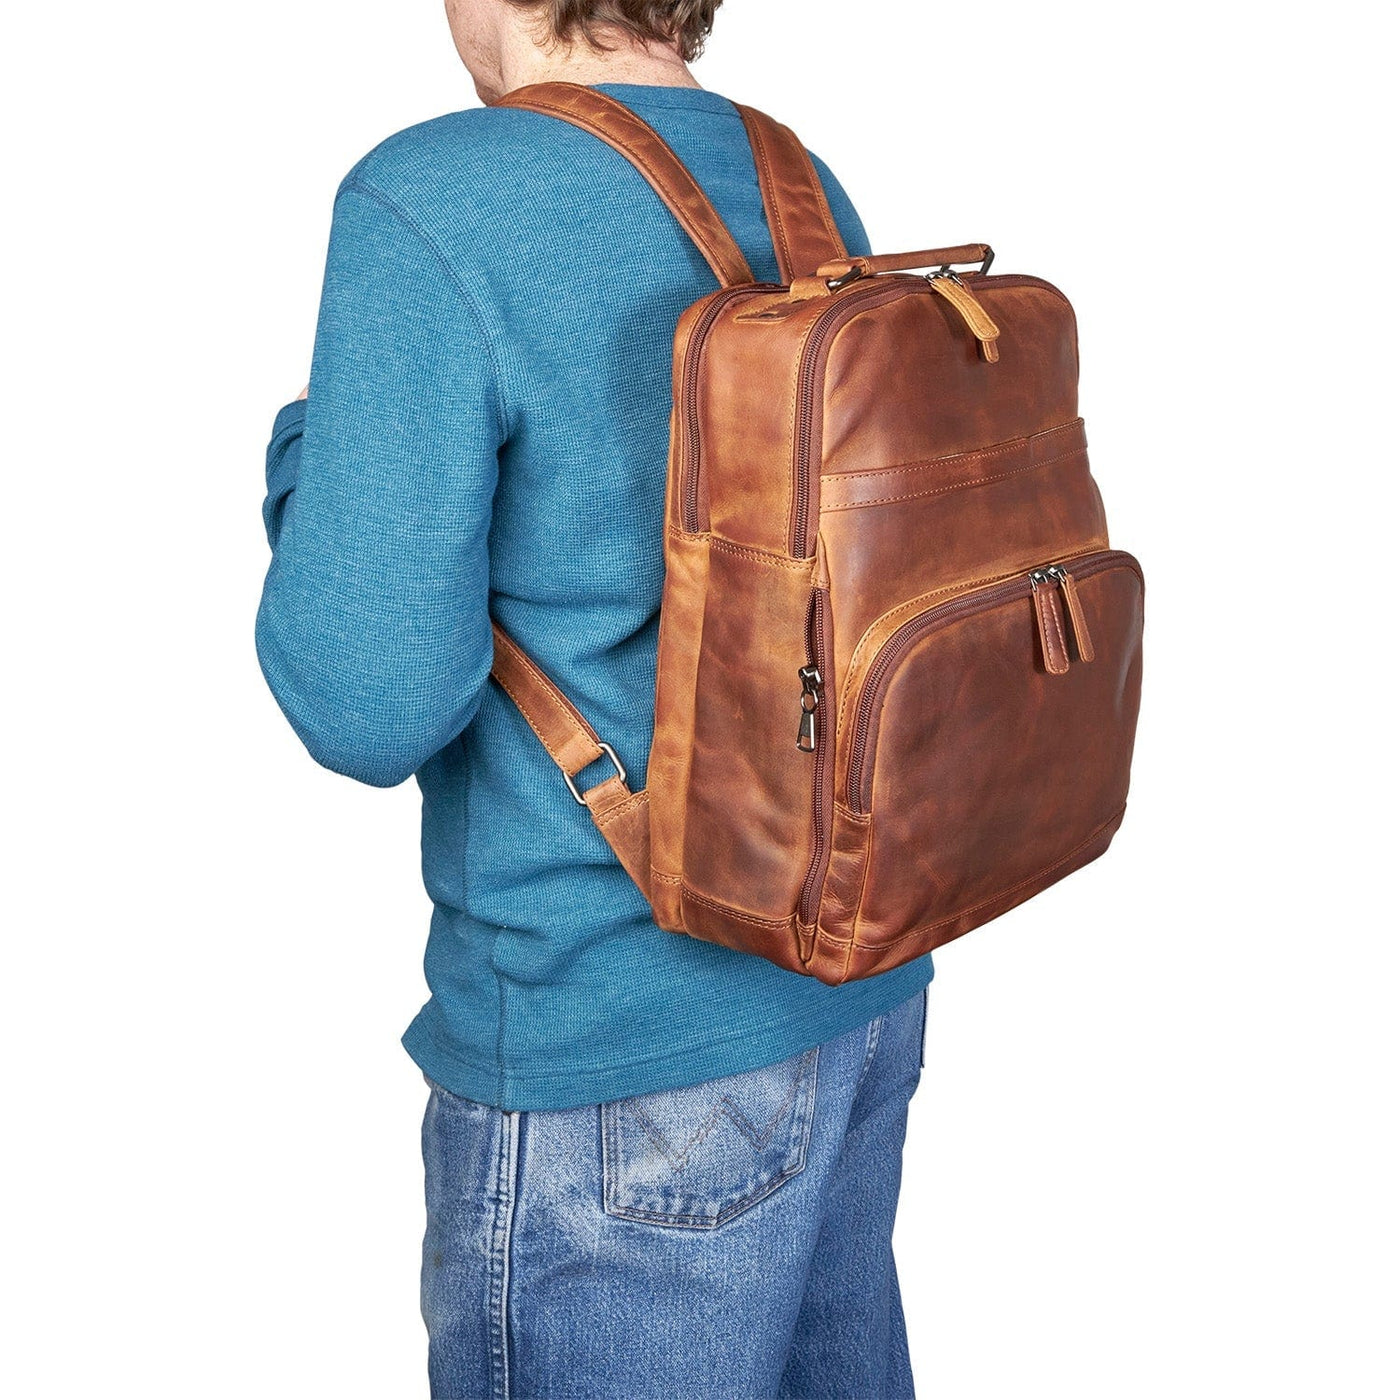  Lady Conceal Concealed Carry Quinn Unisex Leather Backpack Lady Conceal Concealed Carry Quinn Unisex Leather Backpack - Locking Backpack - Pistol Backpack for men - Unisex Hunting Backpack - Bag for gun